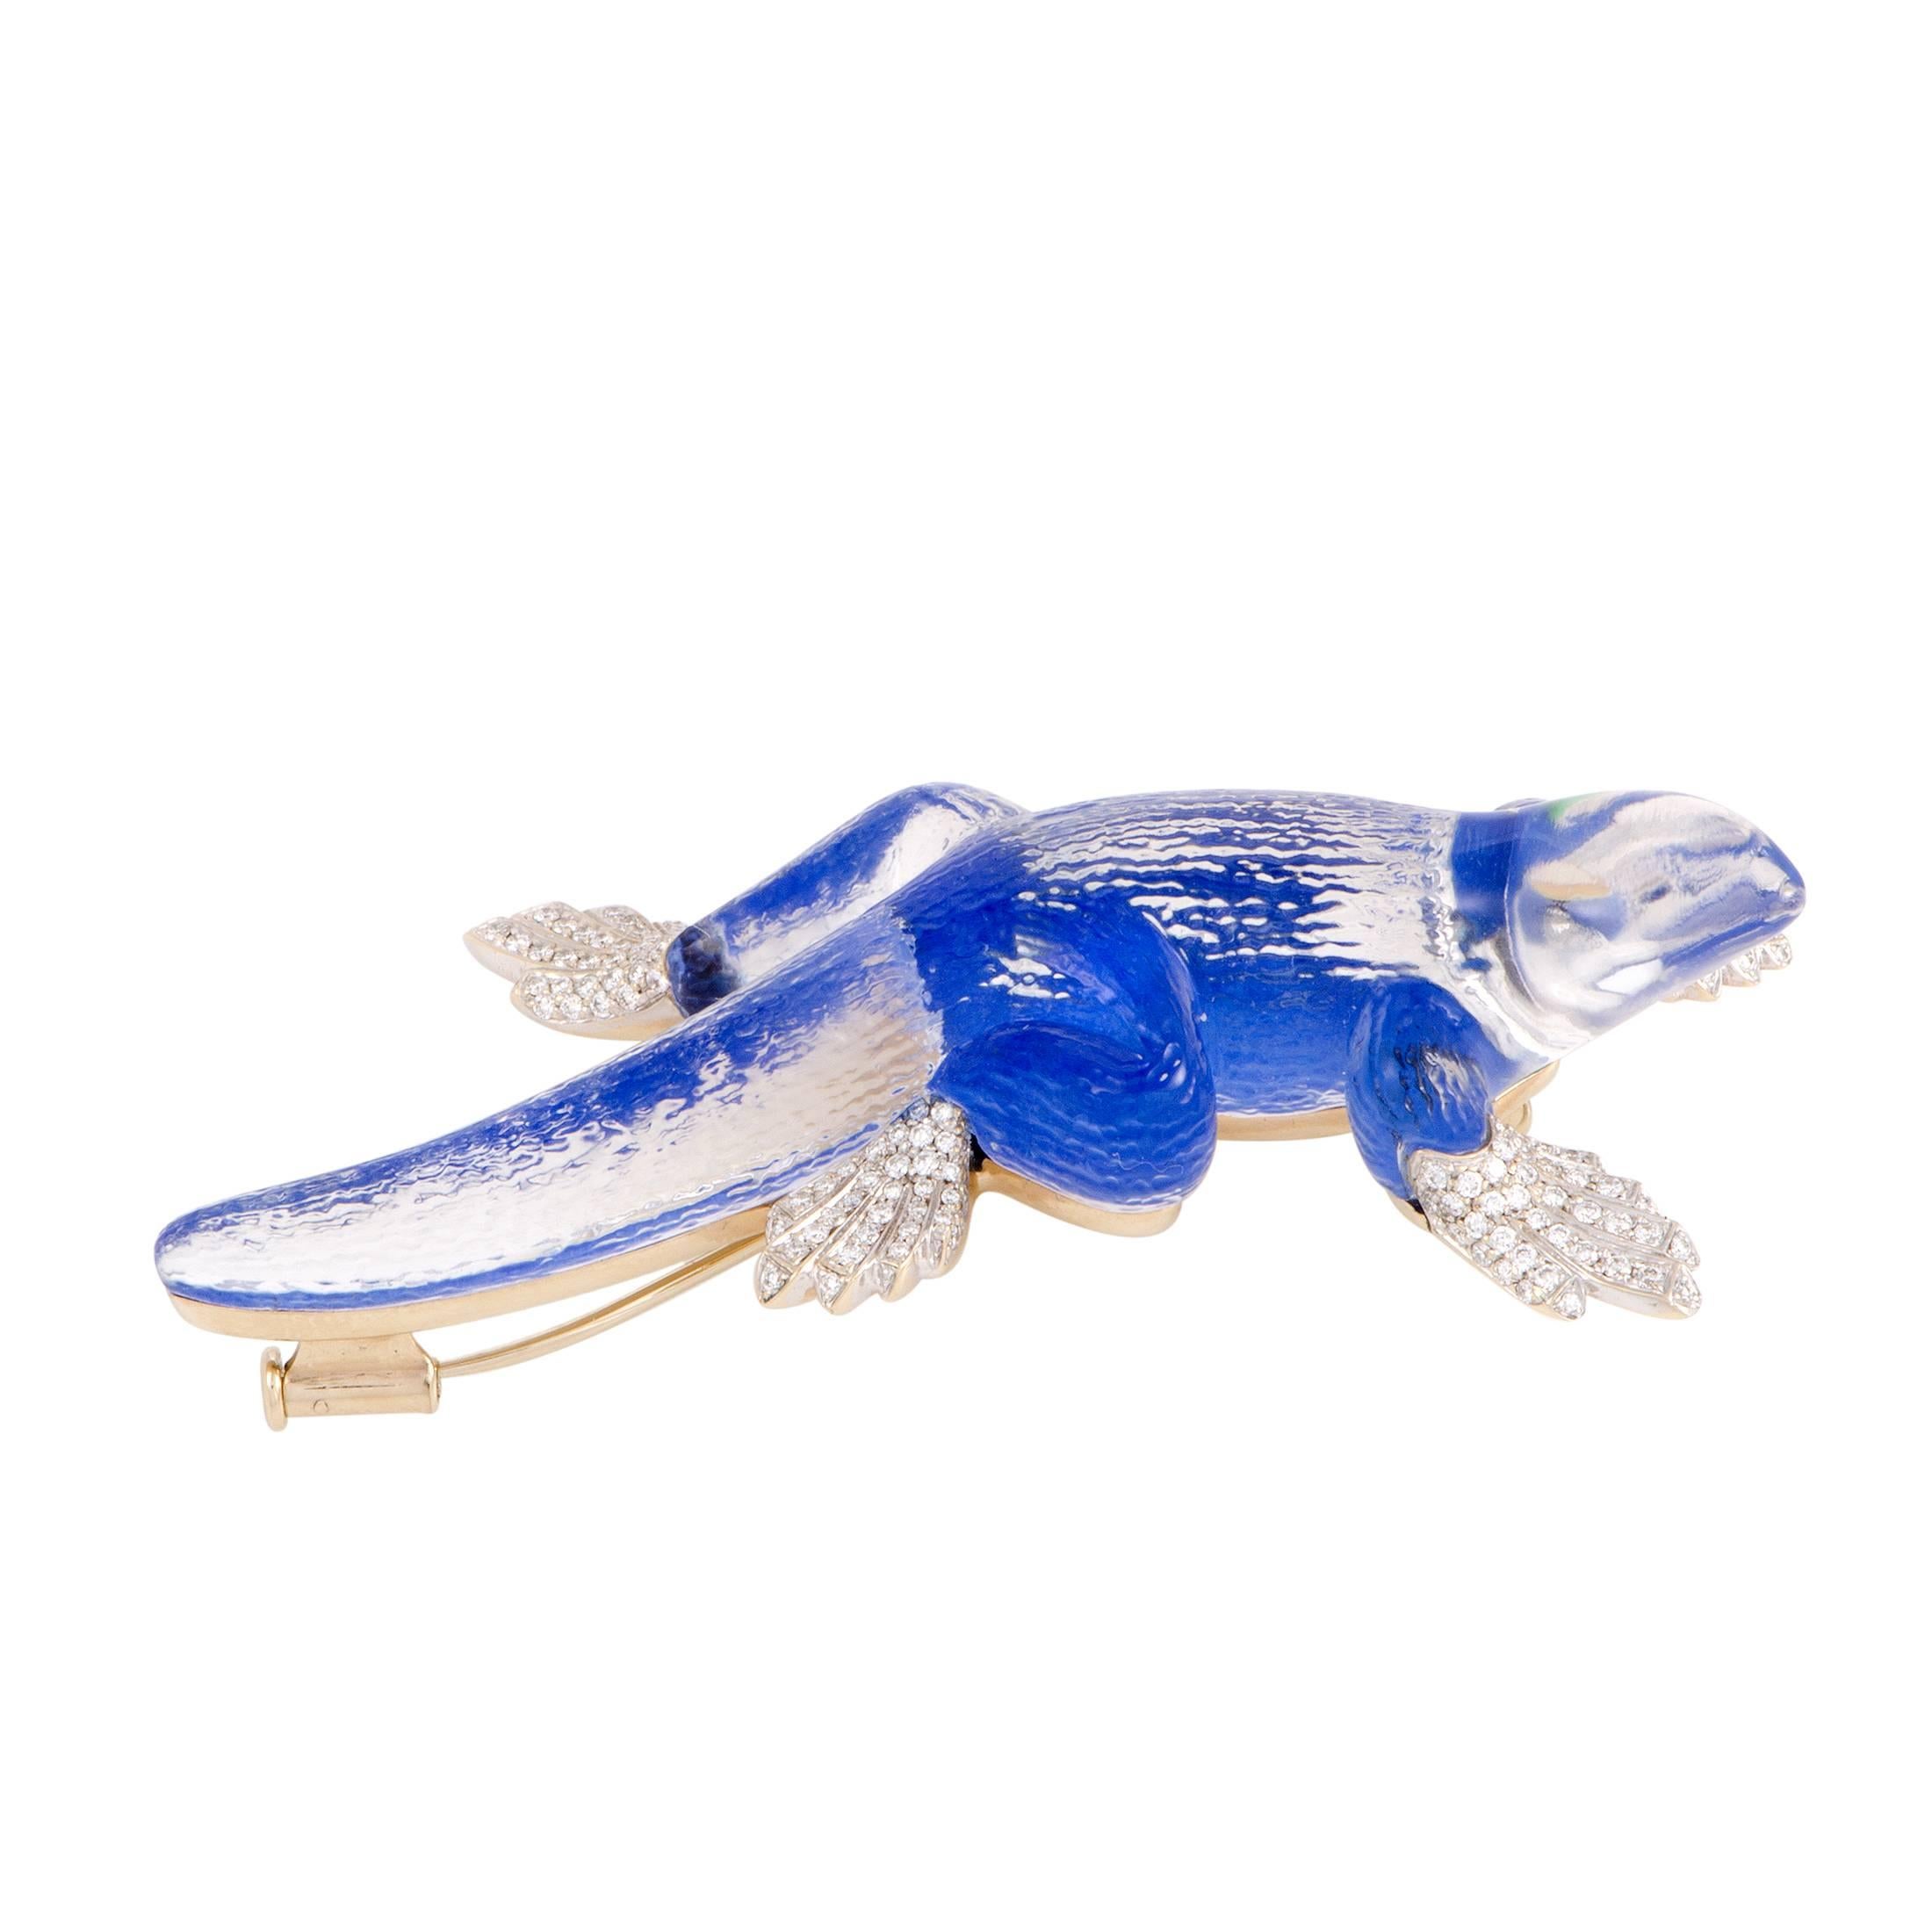 This unique pin by Vhernier is made exquisitely in rock crystal in the shape of a lizard accented with lapis lazuli. Extraordinarily designed in 18K white gold, the incredible pin has beautiful diamonds on the feet of the reptile that add a